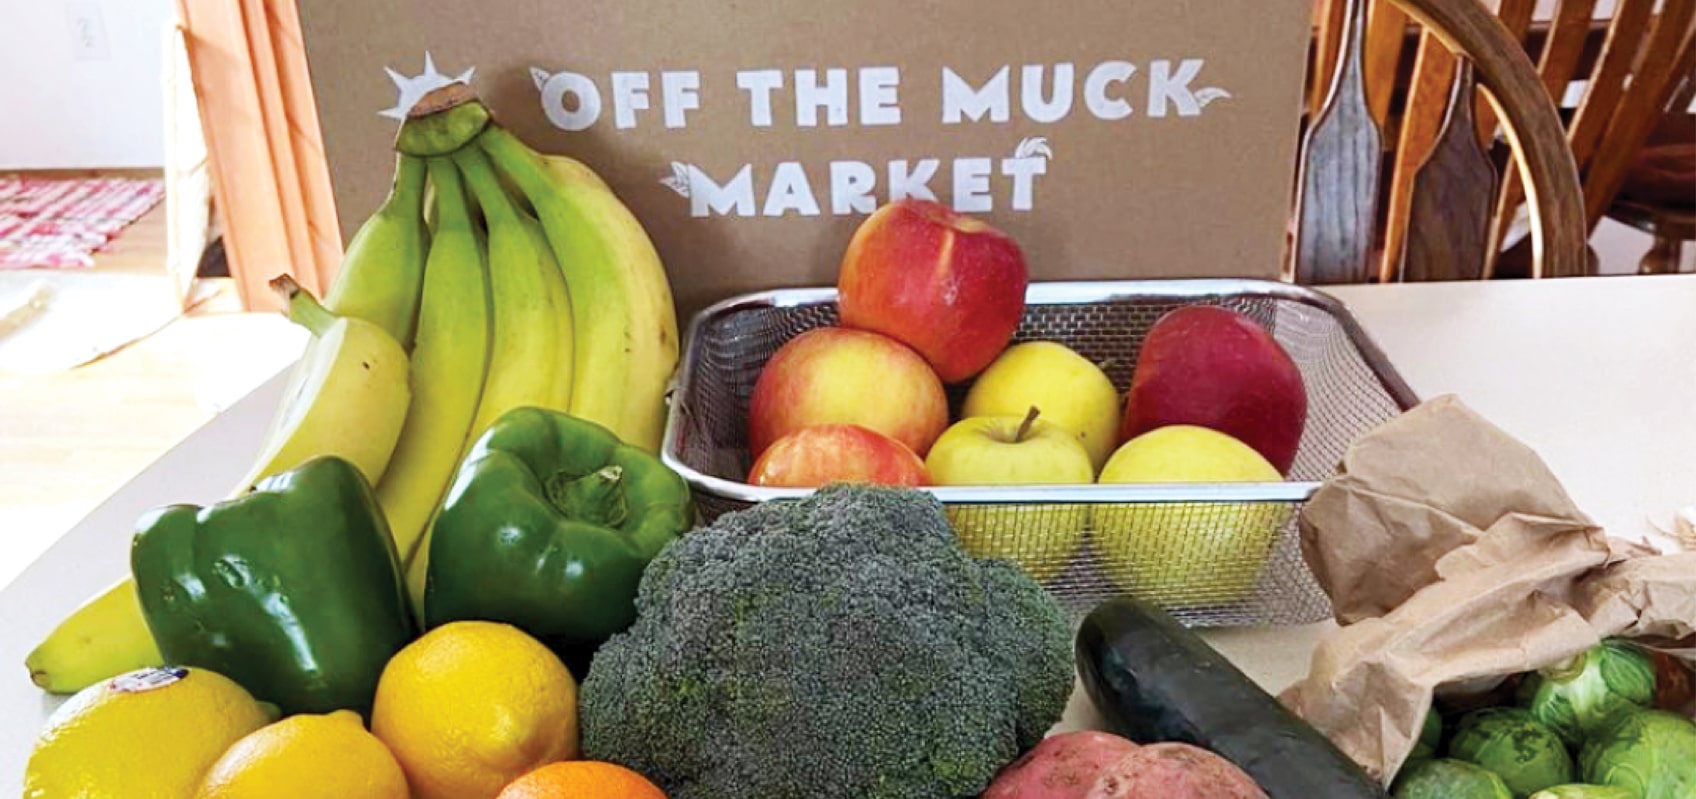 Off the muck market -  fruits and vegetables